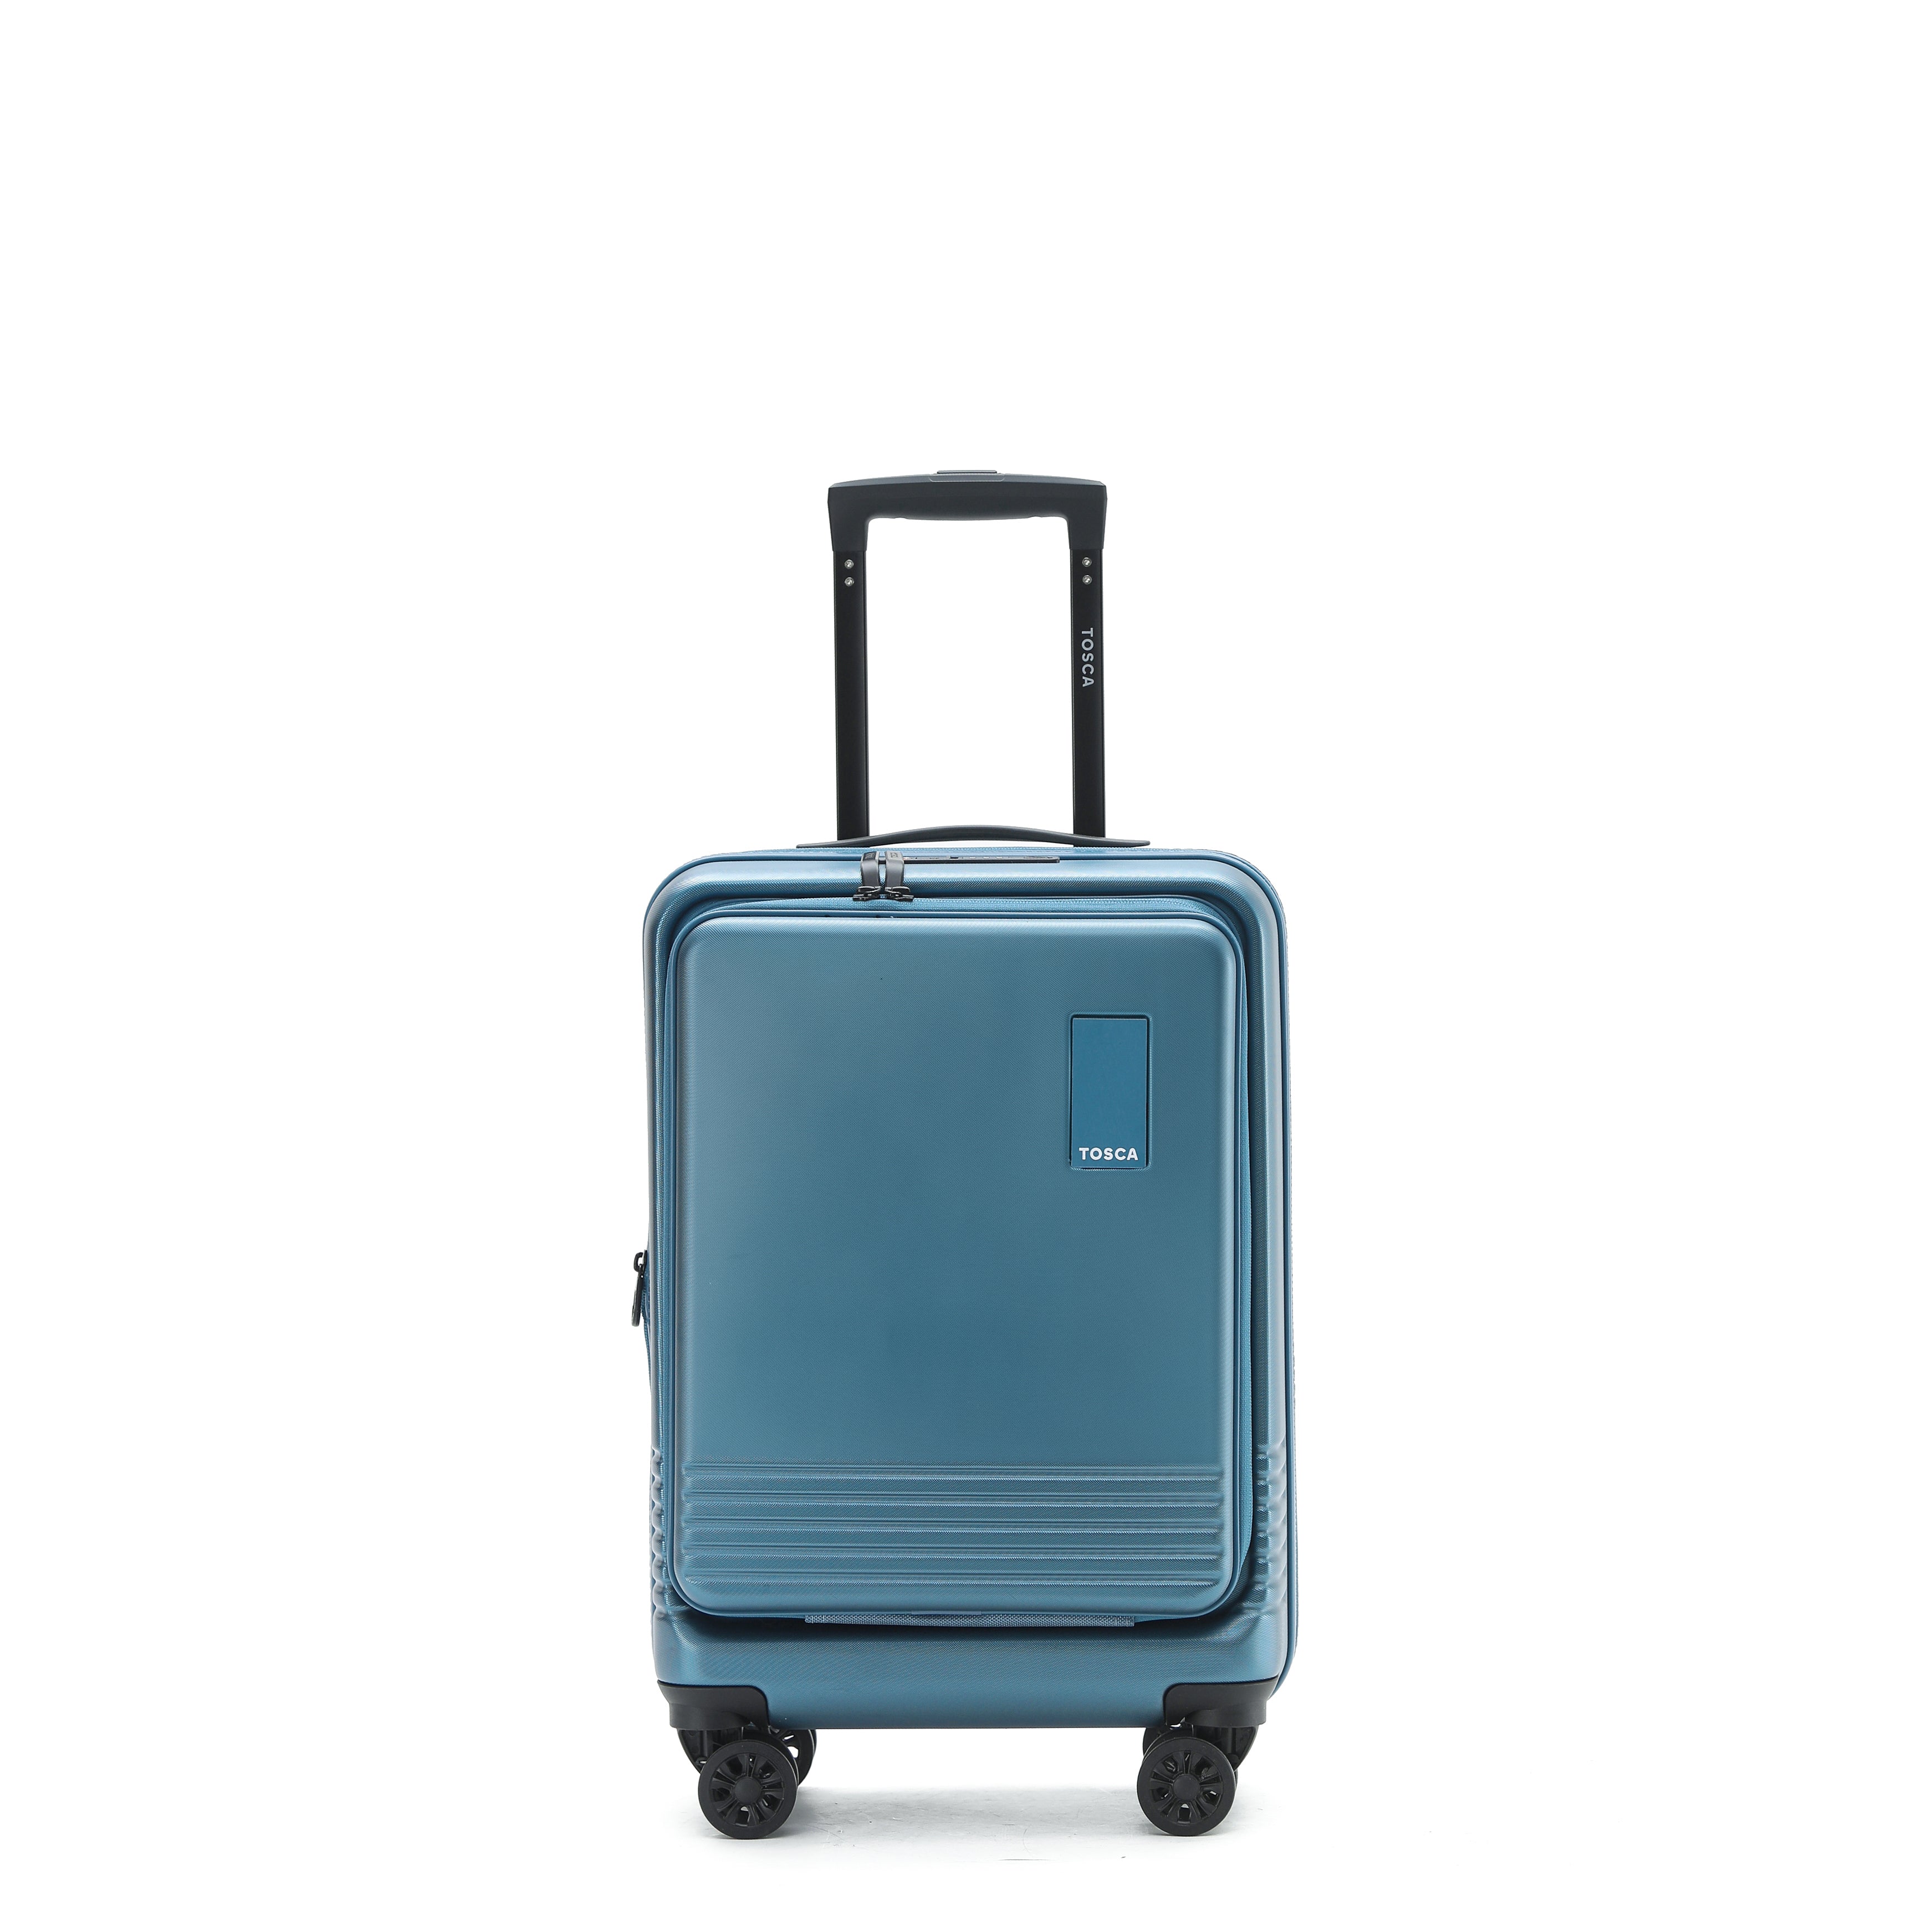 Tosca - TCA644 Horizon Front lid opening Set of 3 suitcases - Blue-6